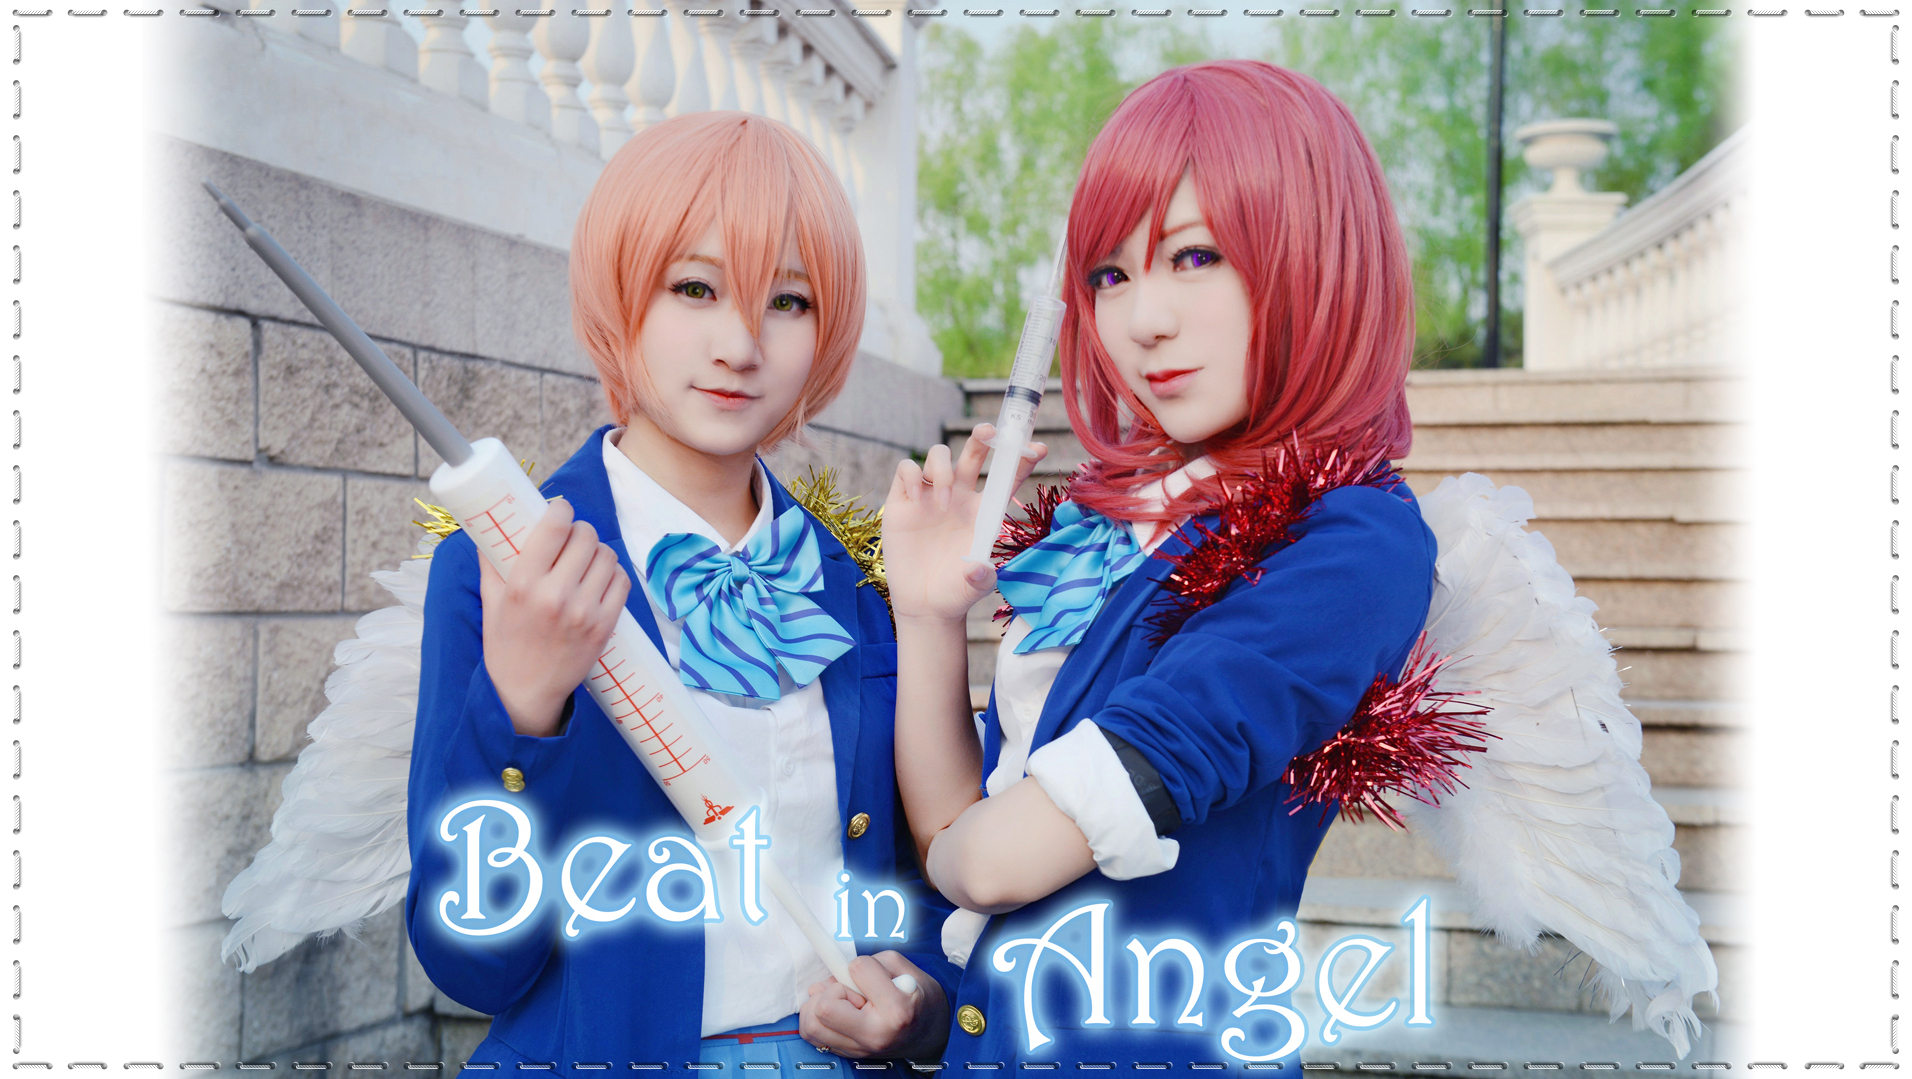 【Ace】Lovelive 《Beat in Angel》 BY 梦岚&